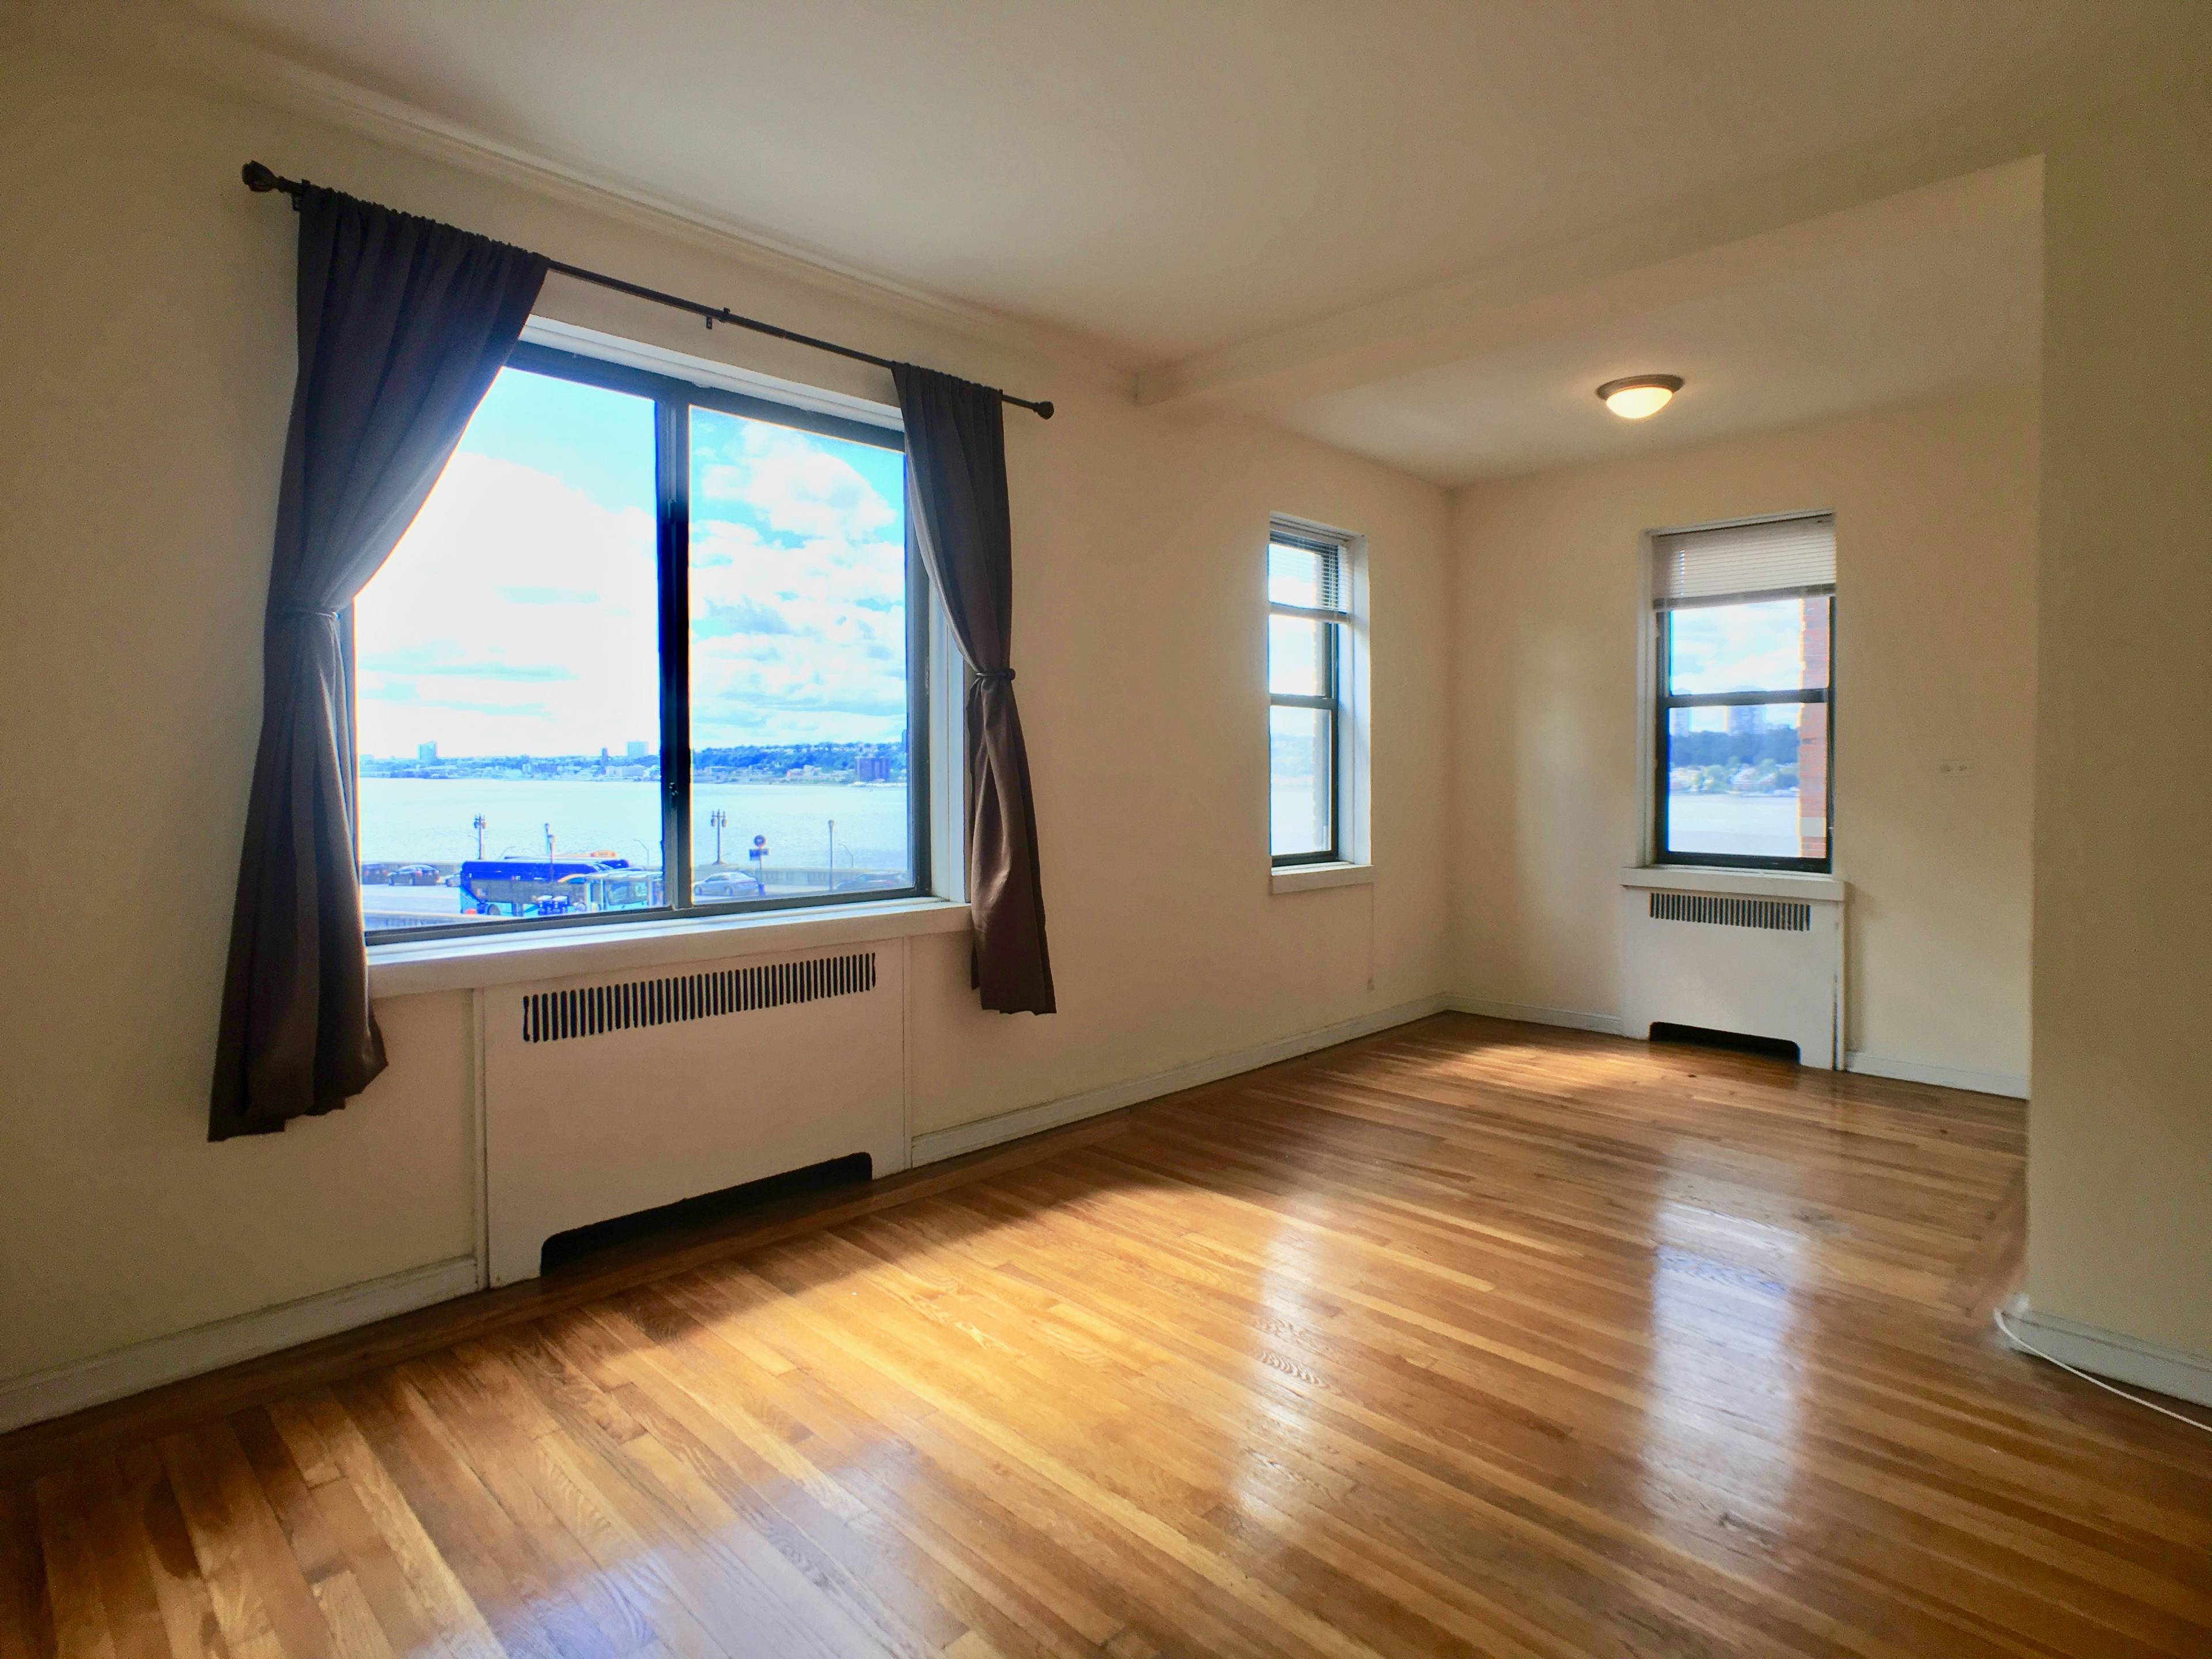 No Board Approval ! ! This remarkably spacious 1 bedroom apartment boasts tremendous views of the Hudson River from every single room.